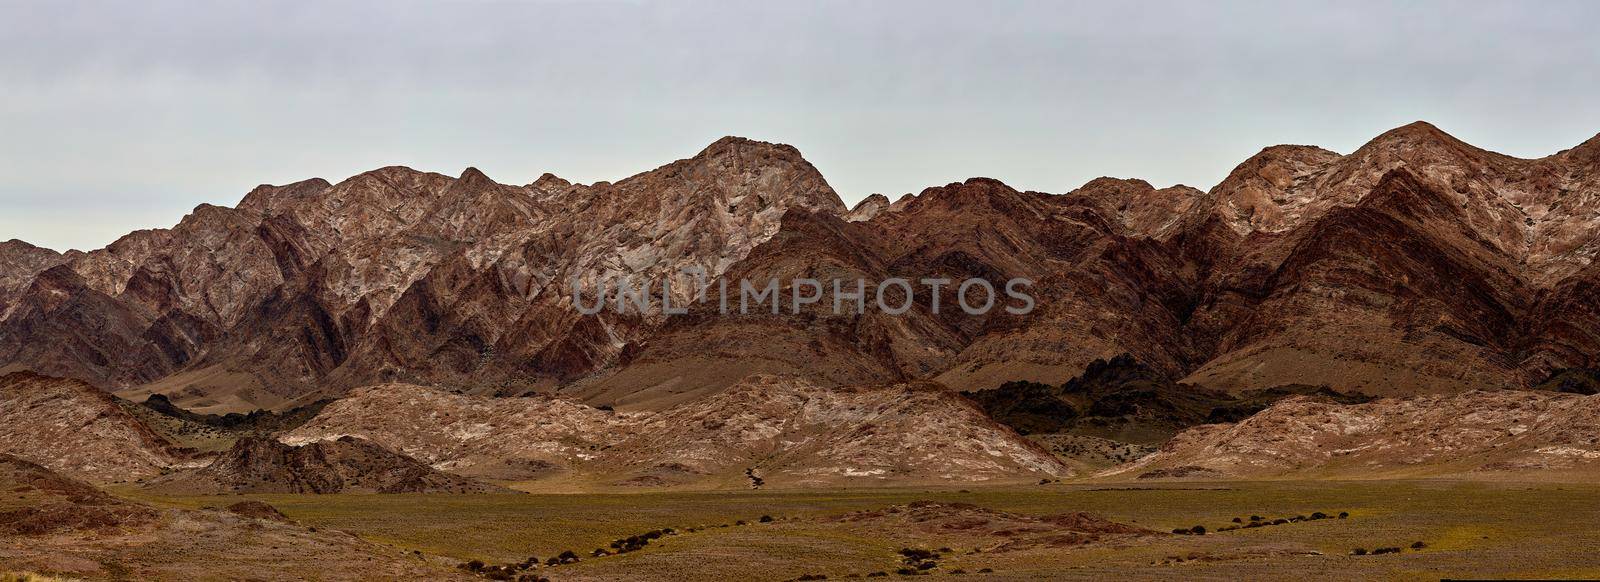 Pasture in the mountains of Mongolia. Landscapes of Mongolia, panorama of mountains in the Gobi desert. by EvgeniyQW